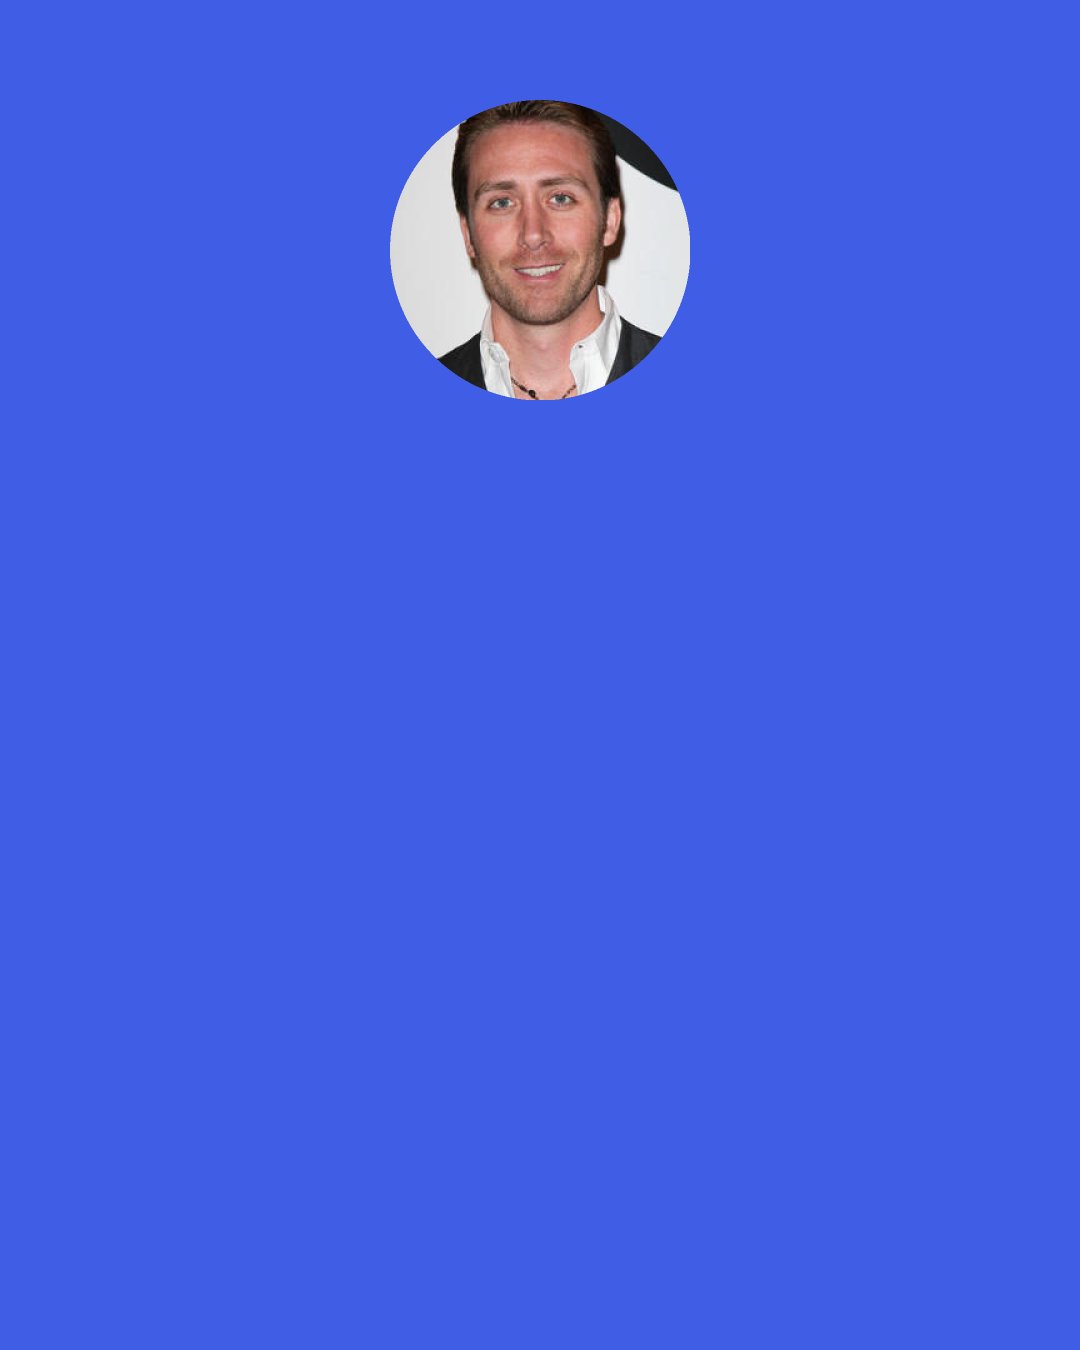 Philippe Cousteau, Jr.: I've seen young people raise hundreds of thousands of dollars to fix a problem in their community. I've seen young people raise hundreds of thousands of dollars to dig wells in Africa. I've seen young people pass laws, largely impacting their communities. They do have the power to change the world.